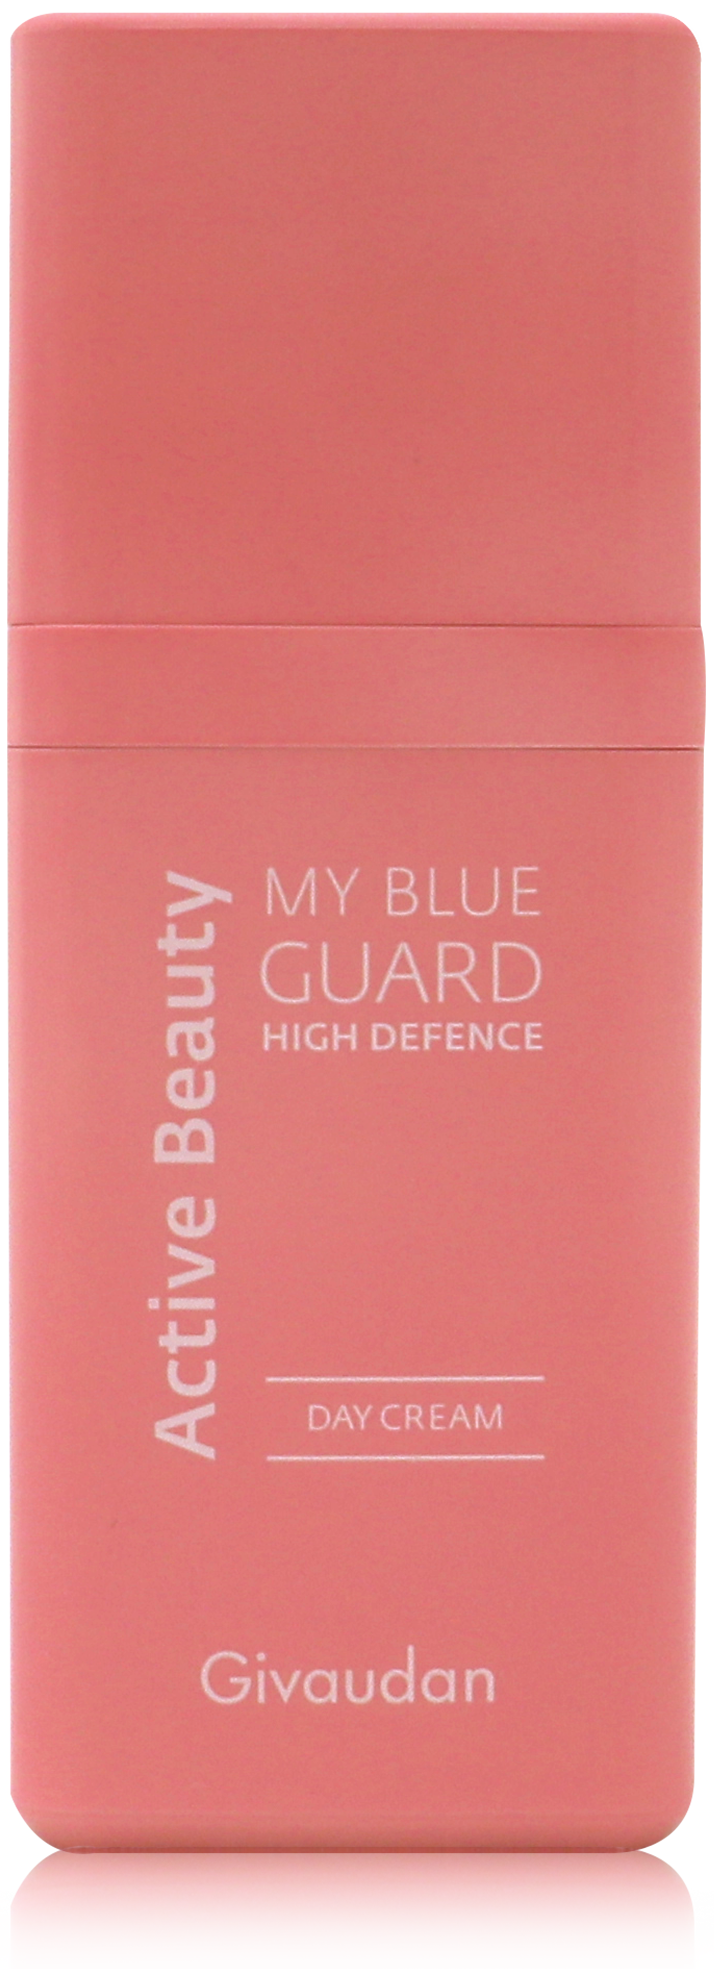 Givaudan's My Blue Guard High Defence